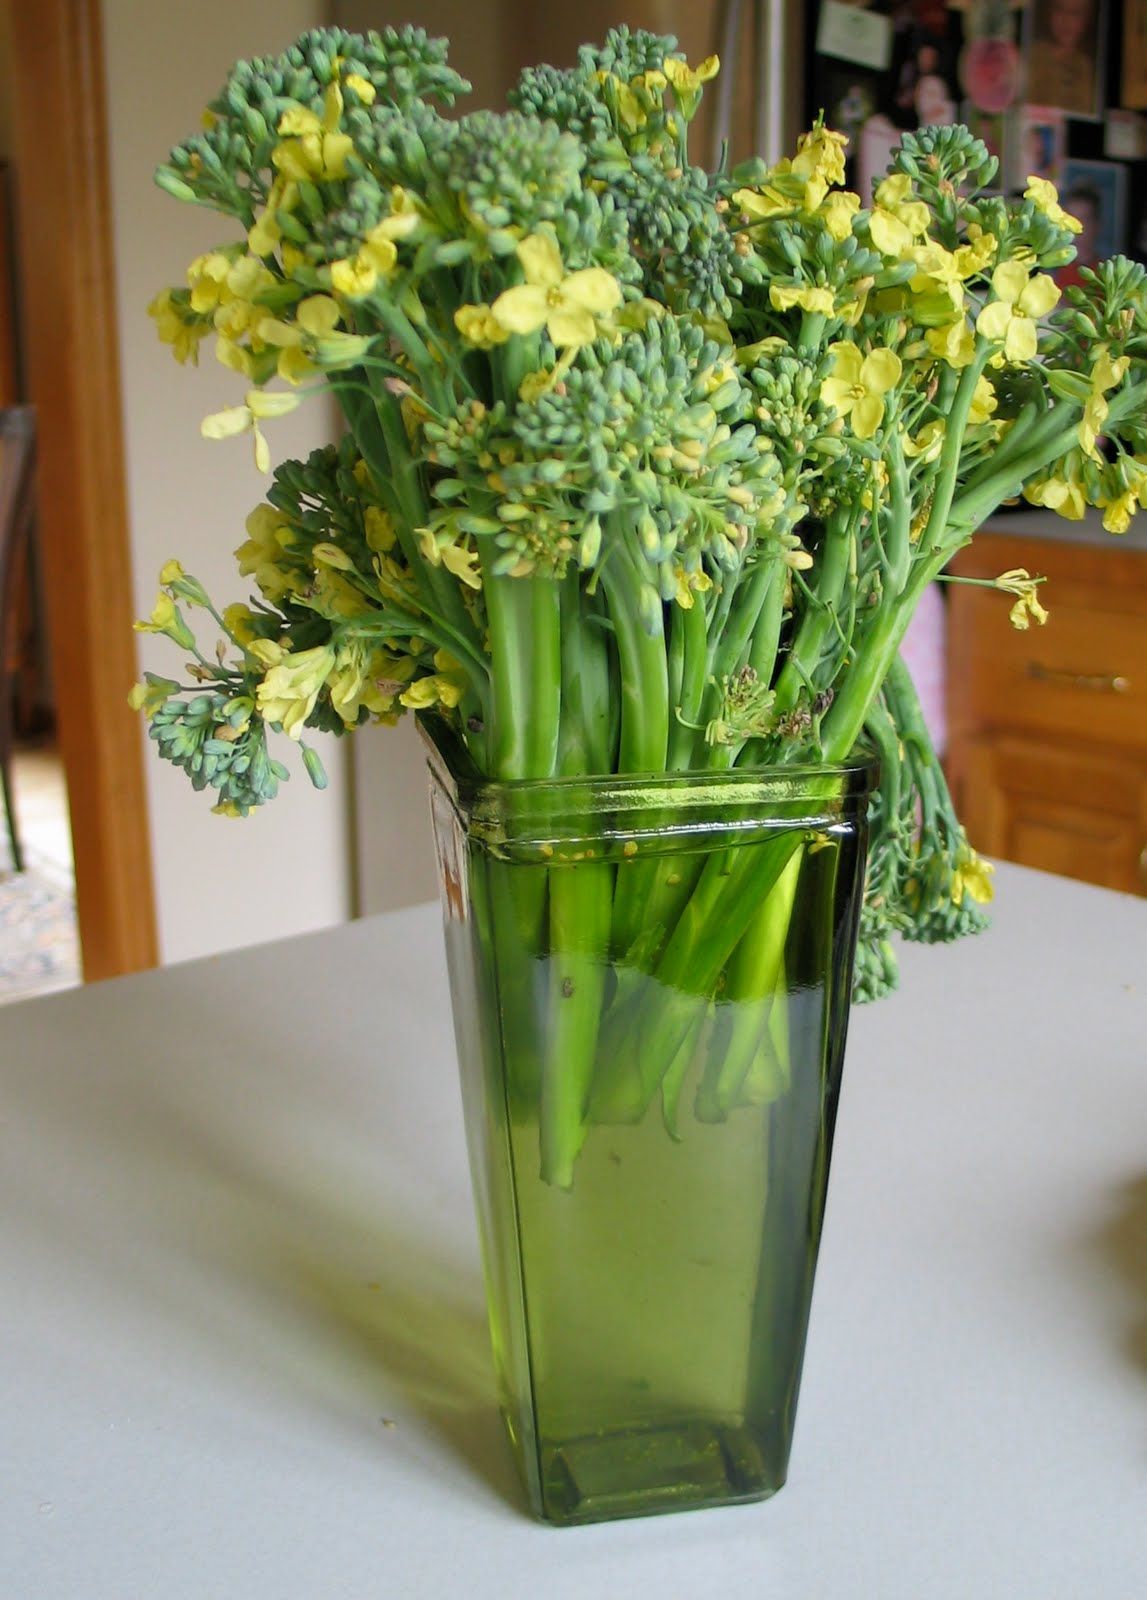 Don't just eat broccoli, they make beautiful flowers